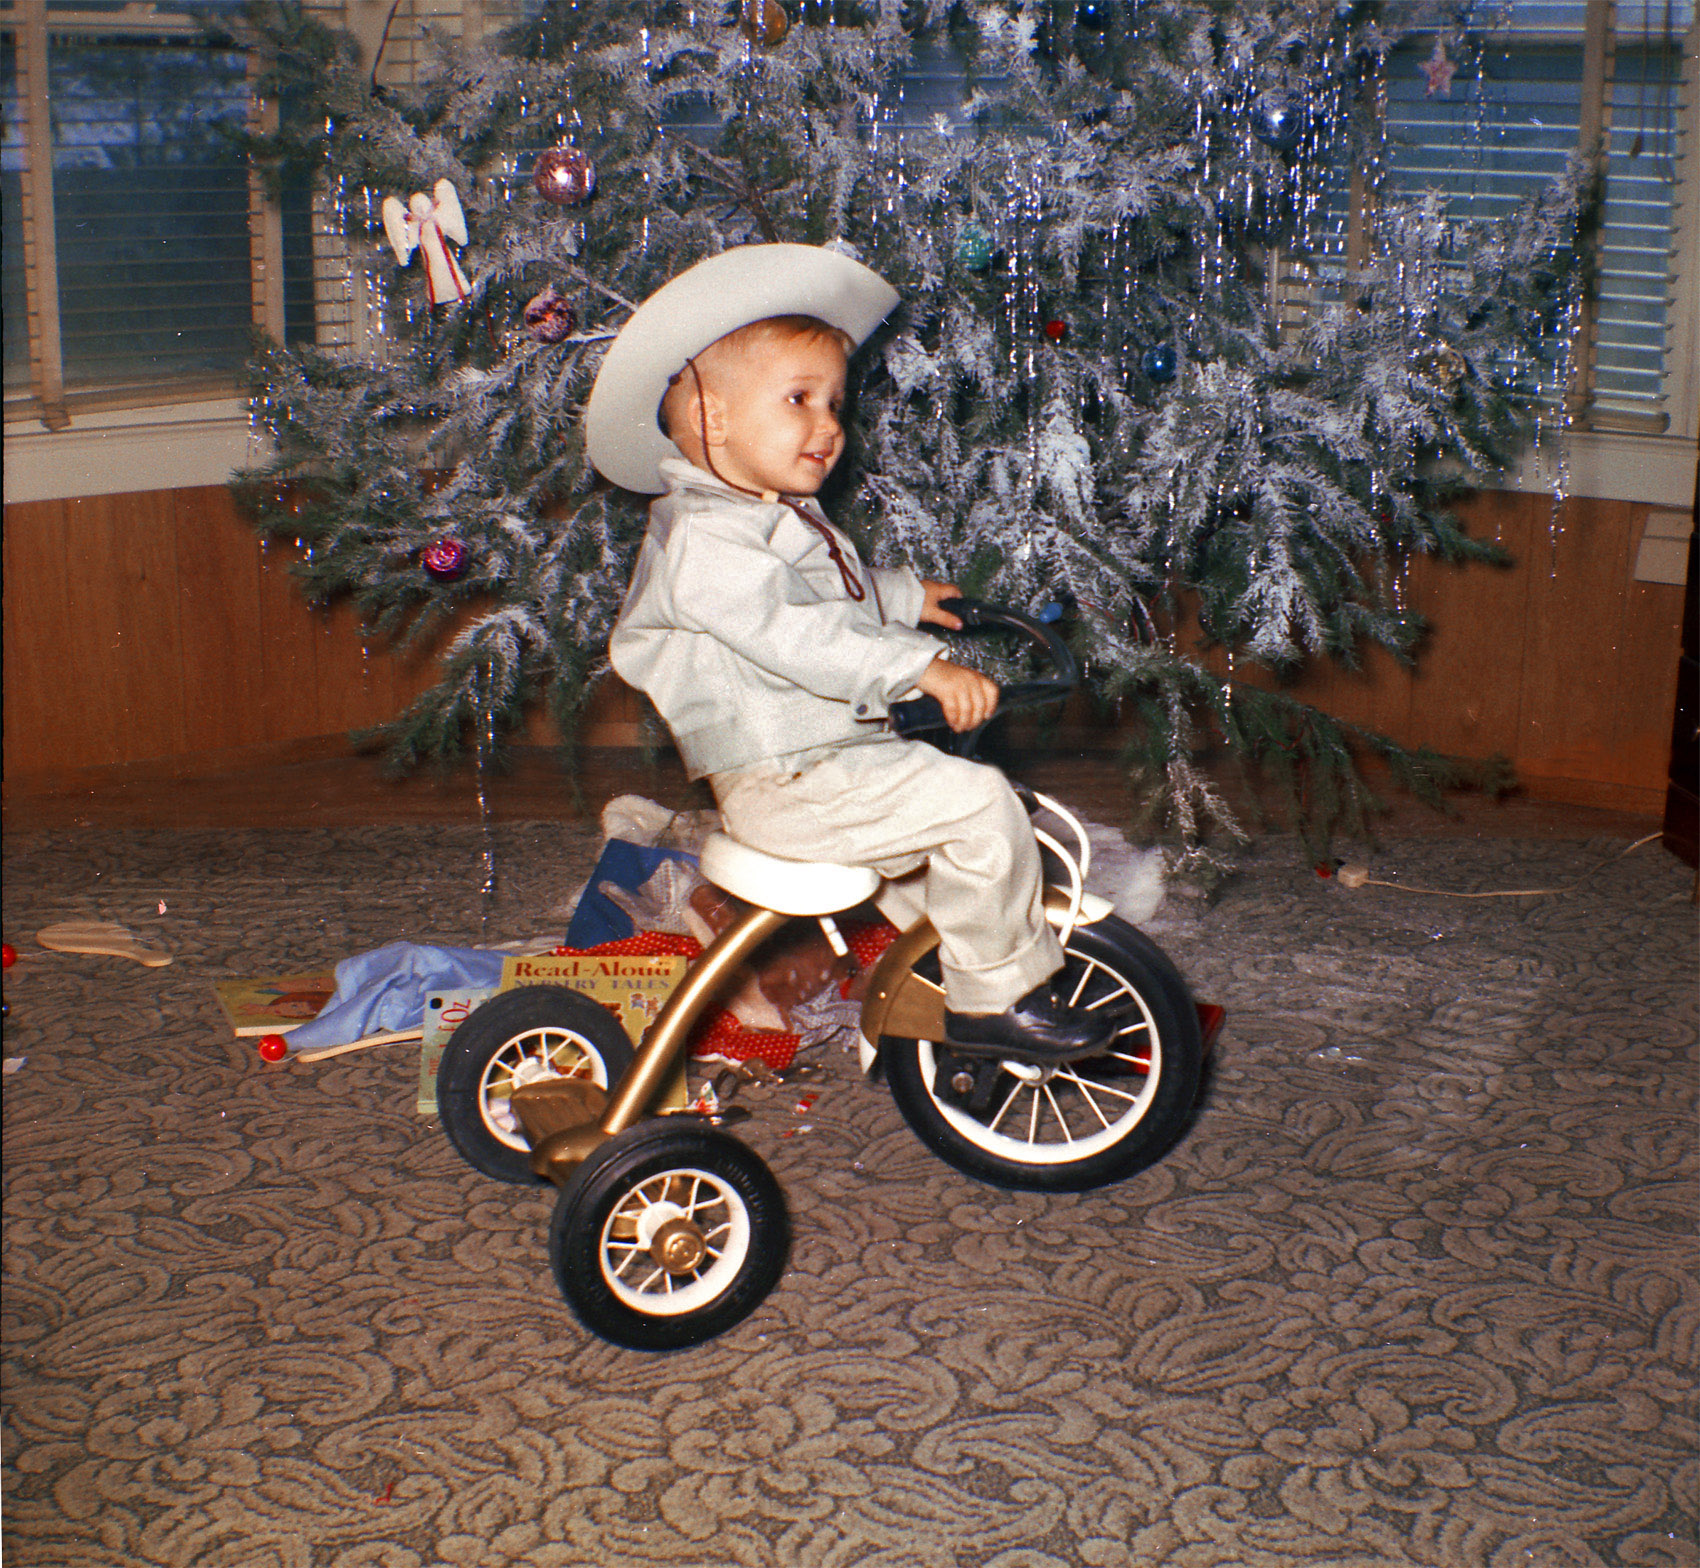 This picture of my dad was taken on Christmas Day, 1963. I thought it fitting to post this after seeing tterrace's tricycle picture. I guess the whole dressing up like a cowboy and riding tricycles thing was popular for a while. View full size.